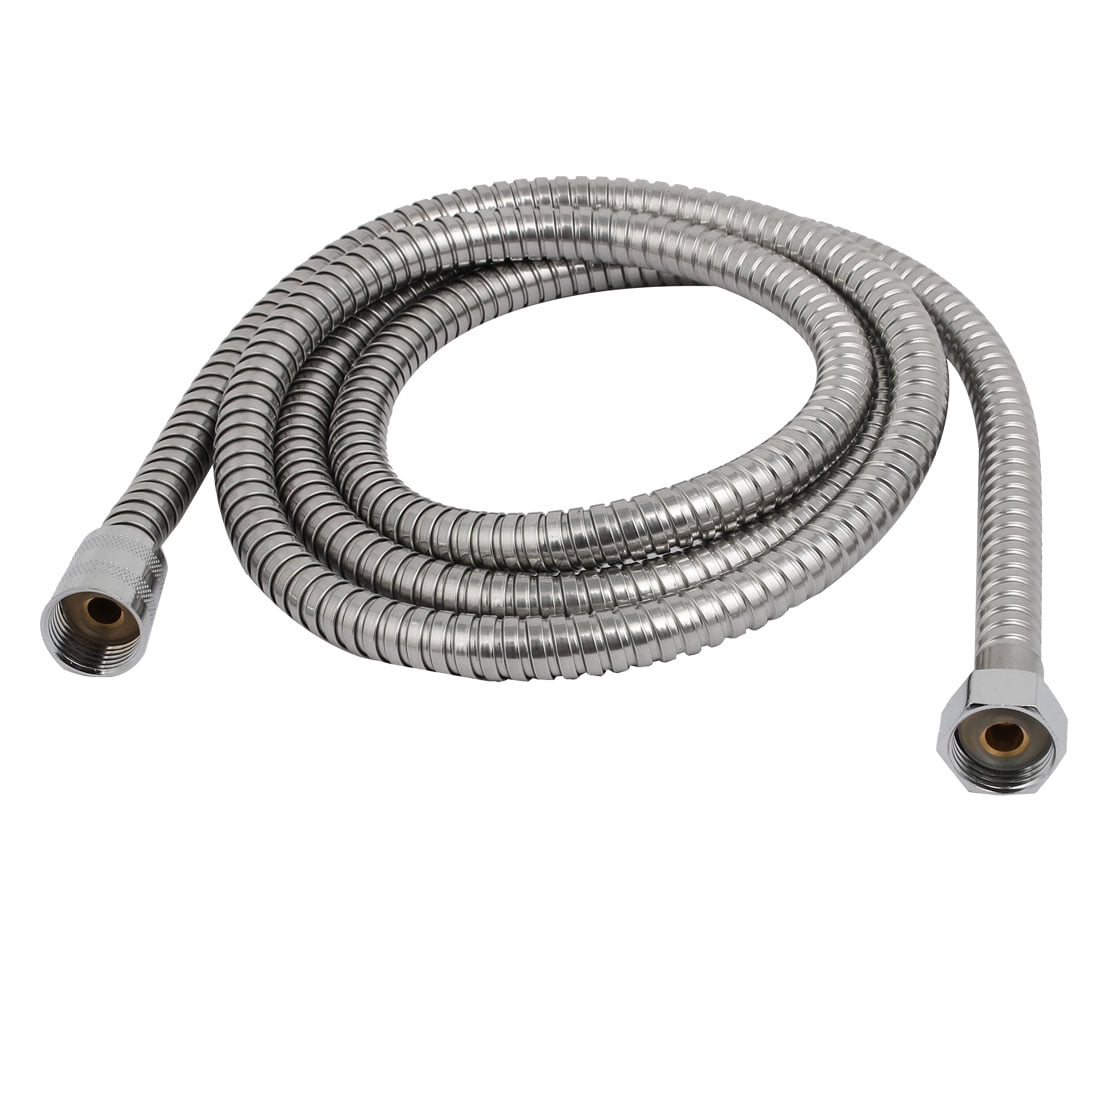 LDR 520 2405SS Replacement Flexible 60-84-Inch Handheld Shower Hose Stainless S